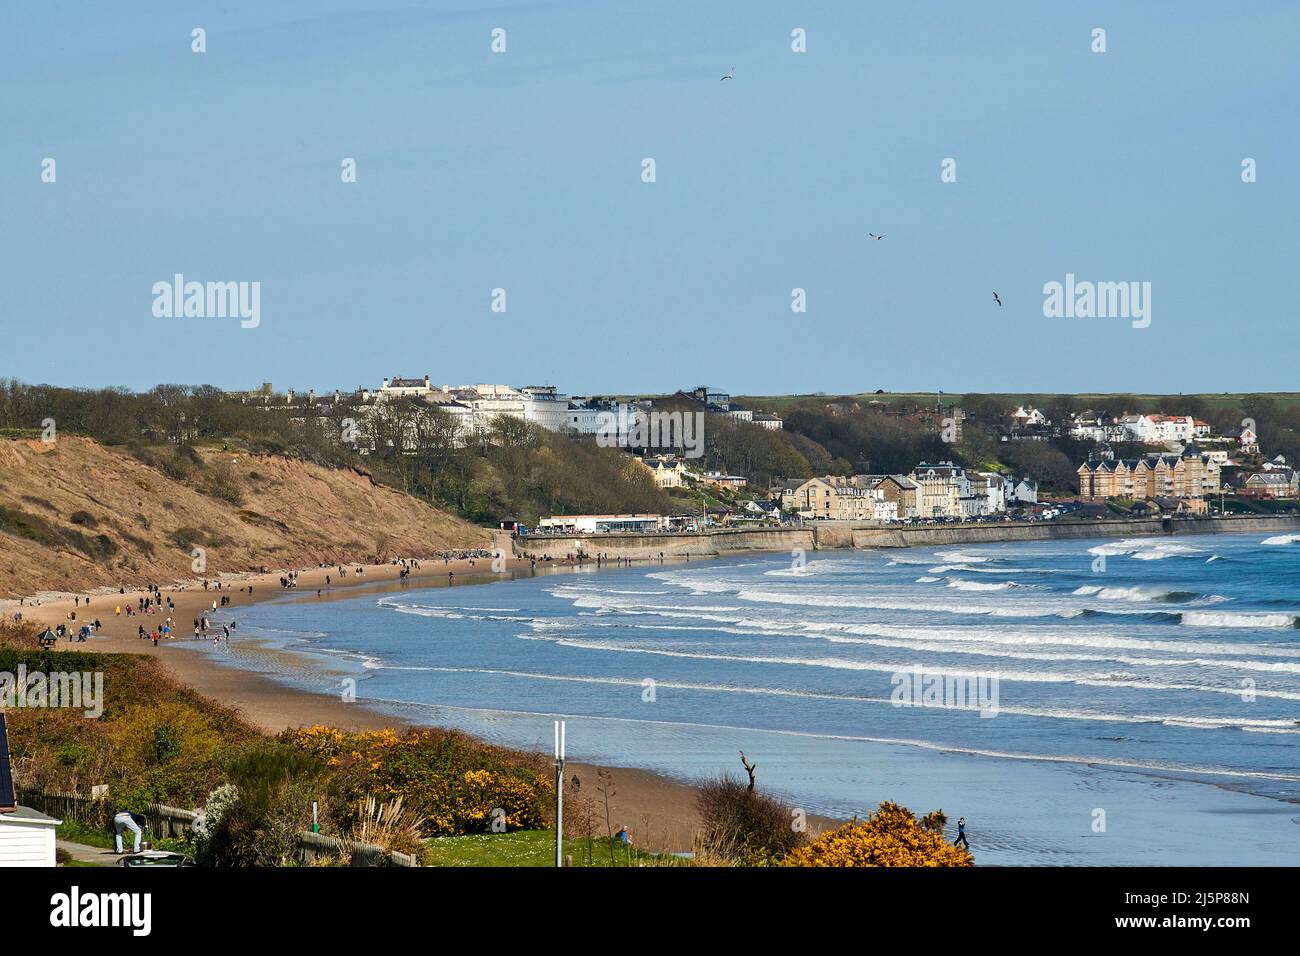 Looking north along the beach to Filey Town, Filey Bay, Yorkshire east coast, northern England, UK Stock Photo